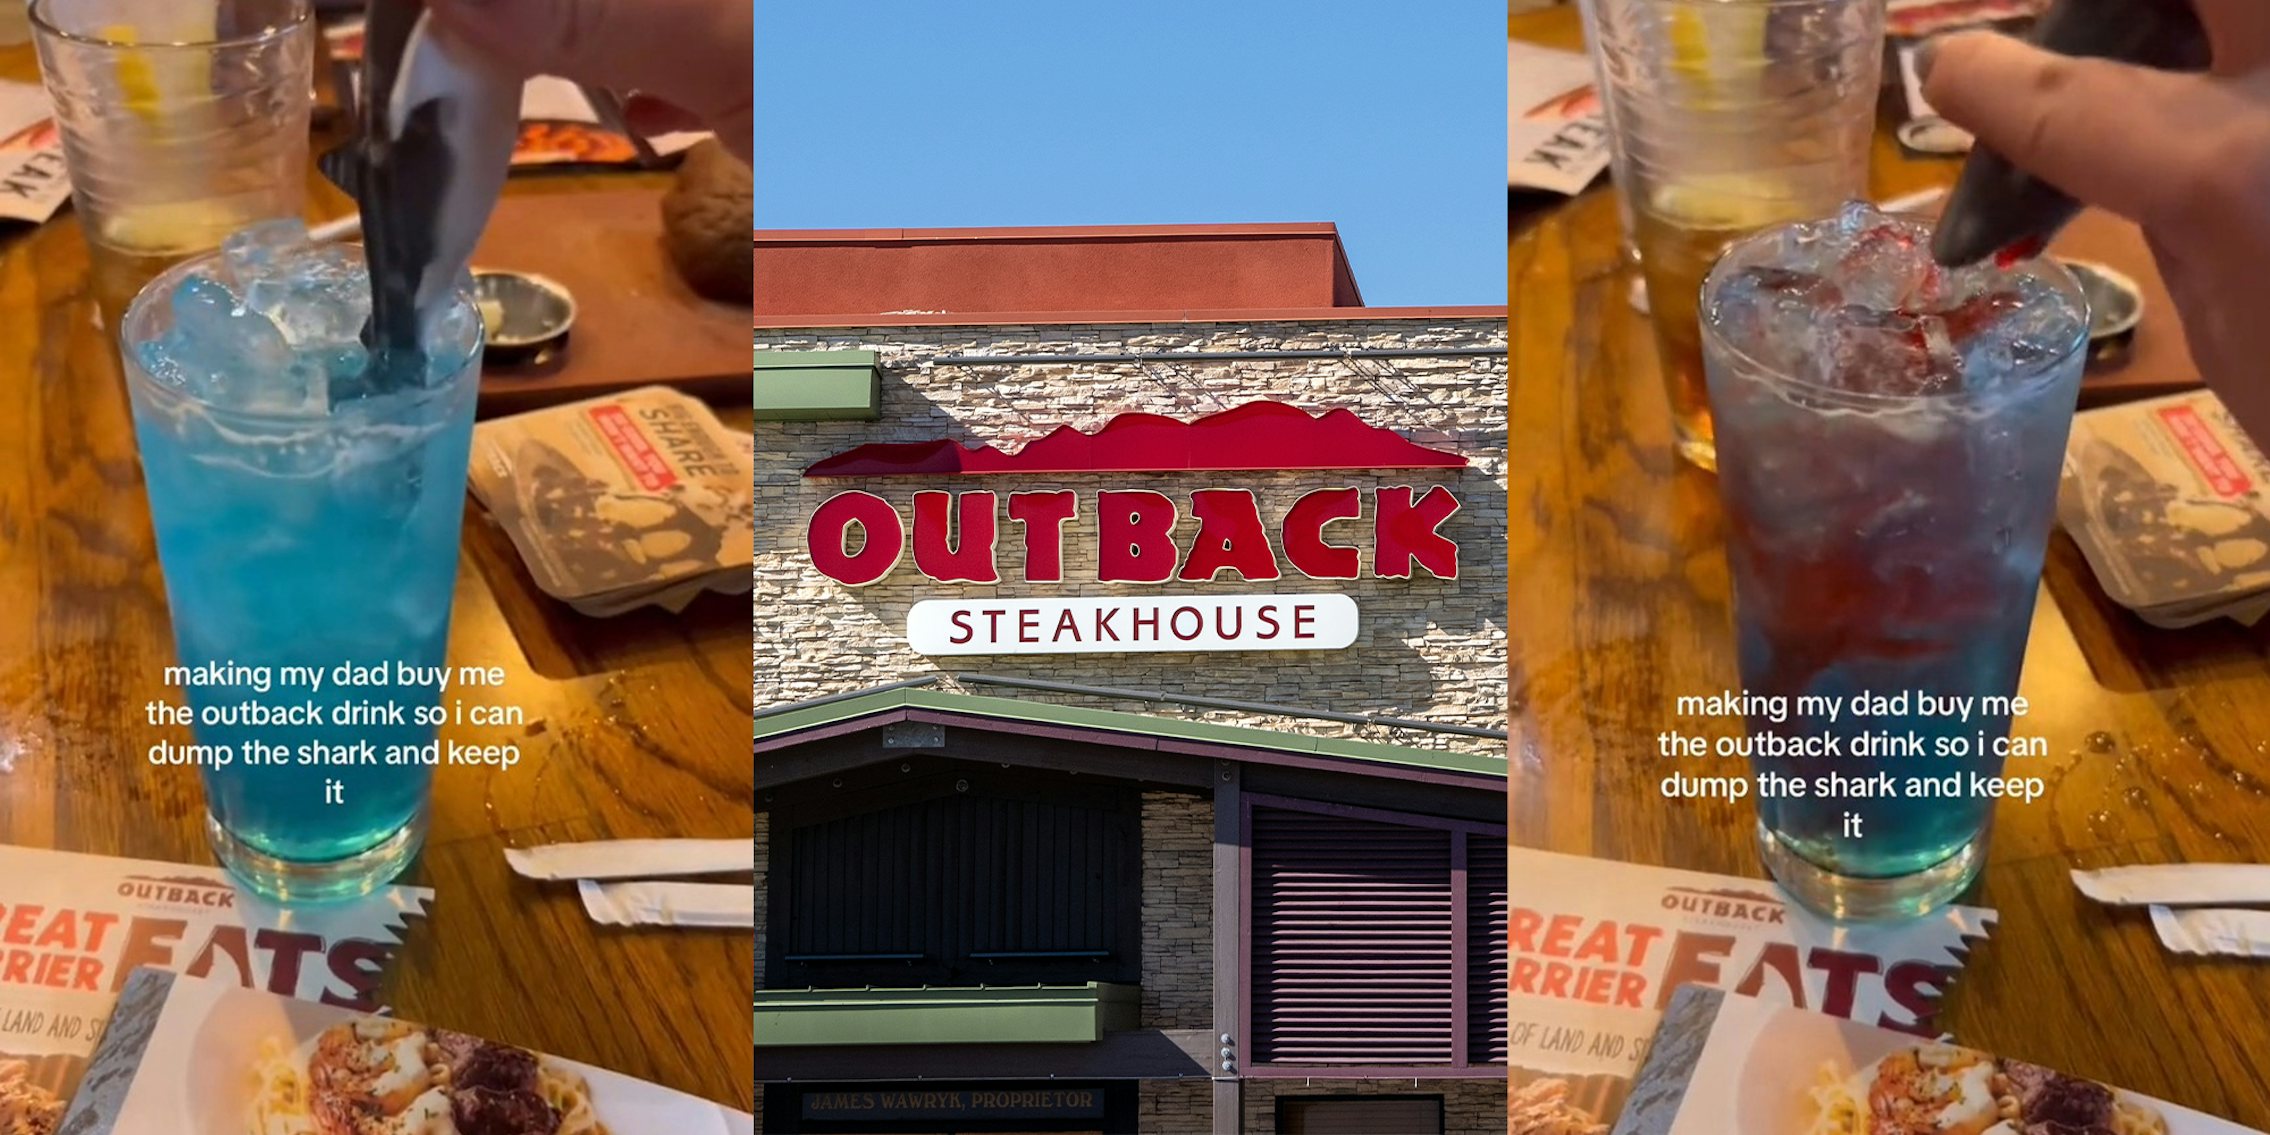 Dad buys Outback Steakhouse shark cocktail just she can dump shark and keep it